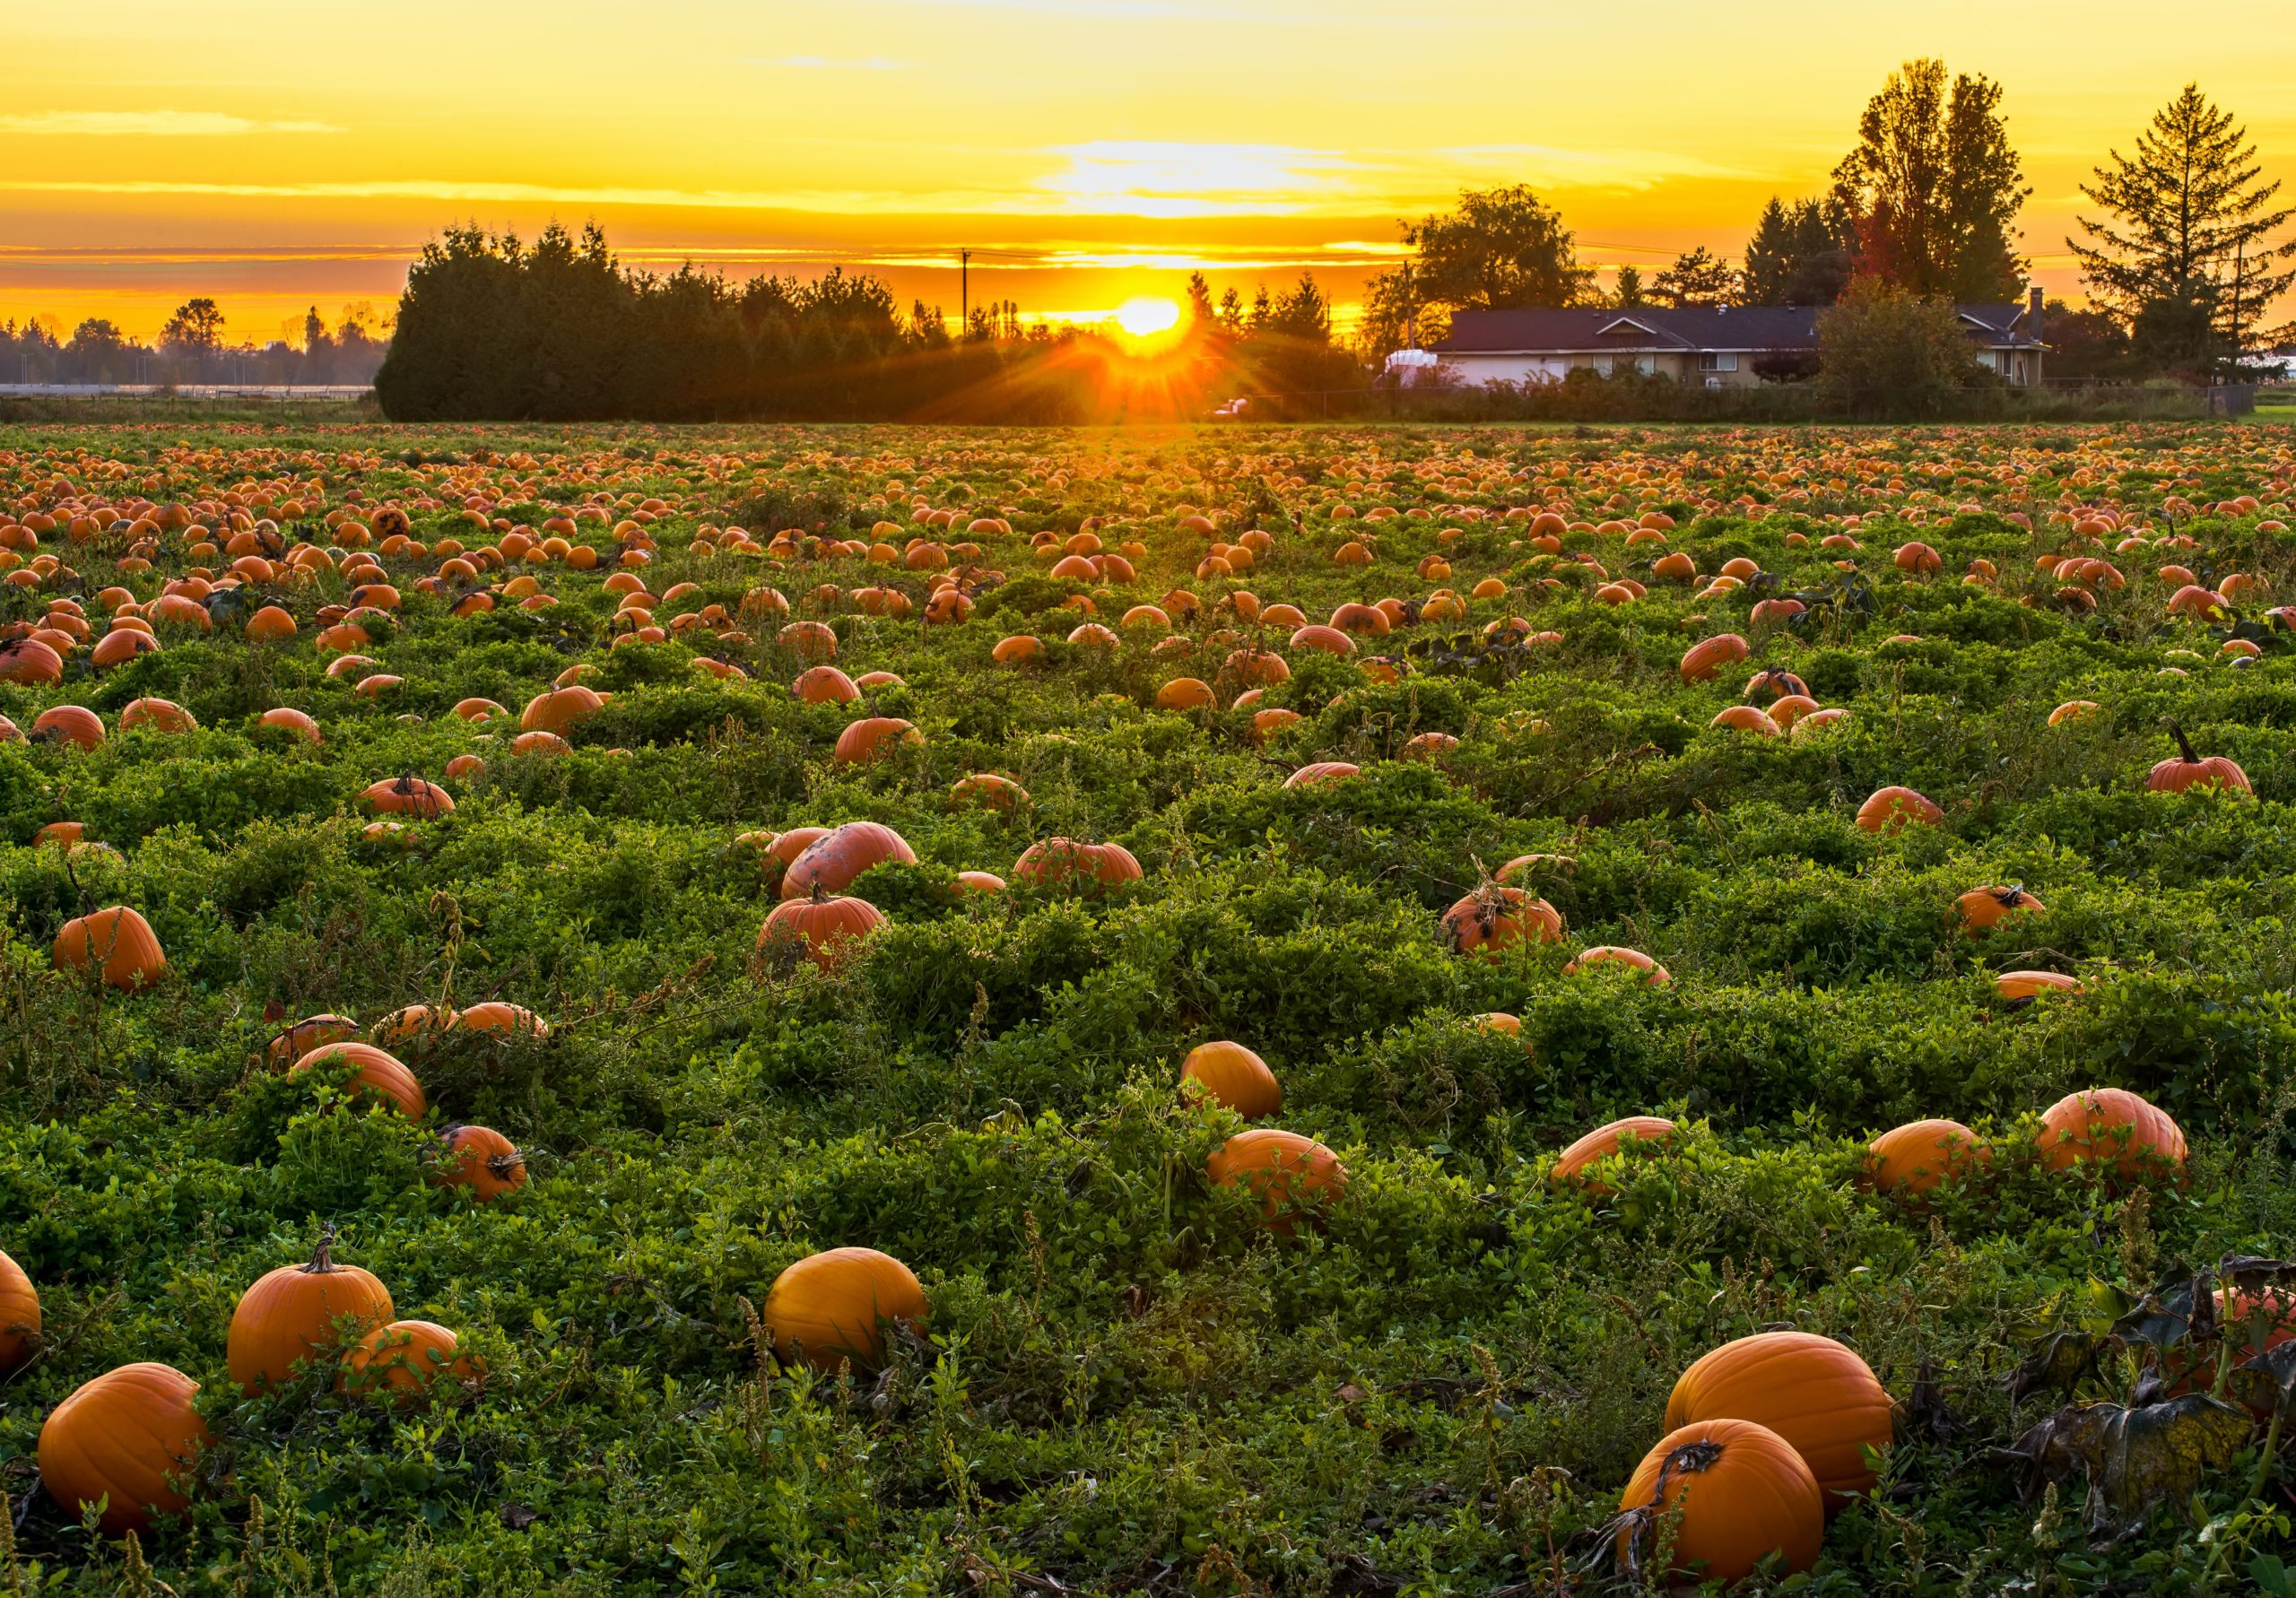 Countless pumpkin sitting in the field of grass as the sun sets in the distance